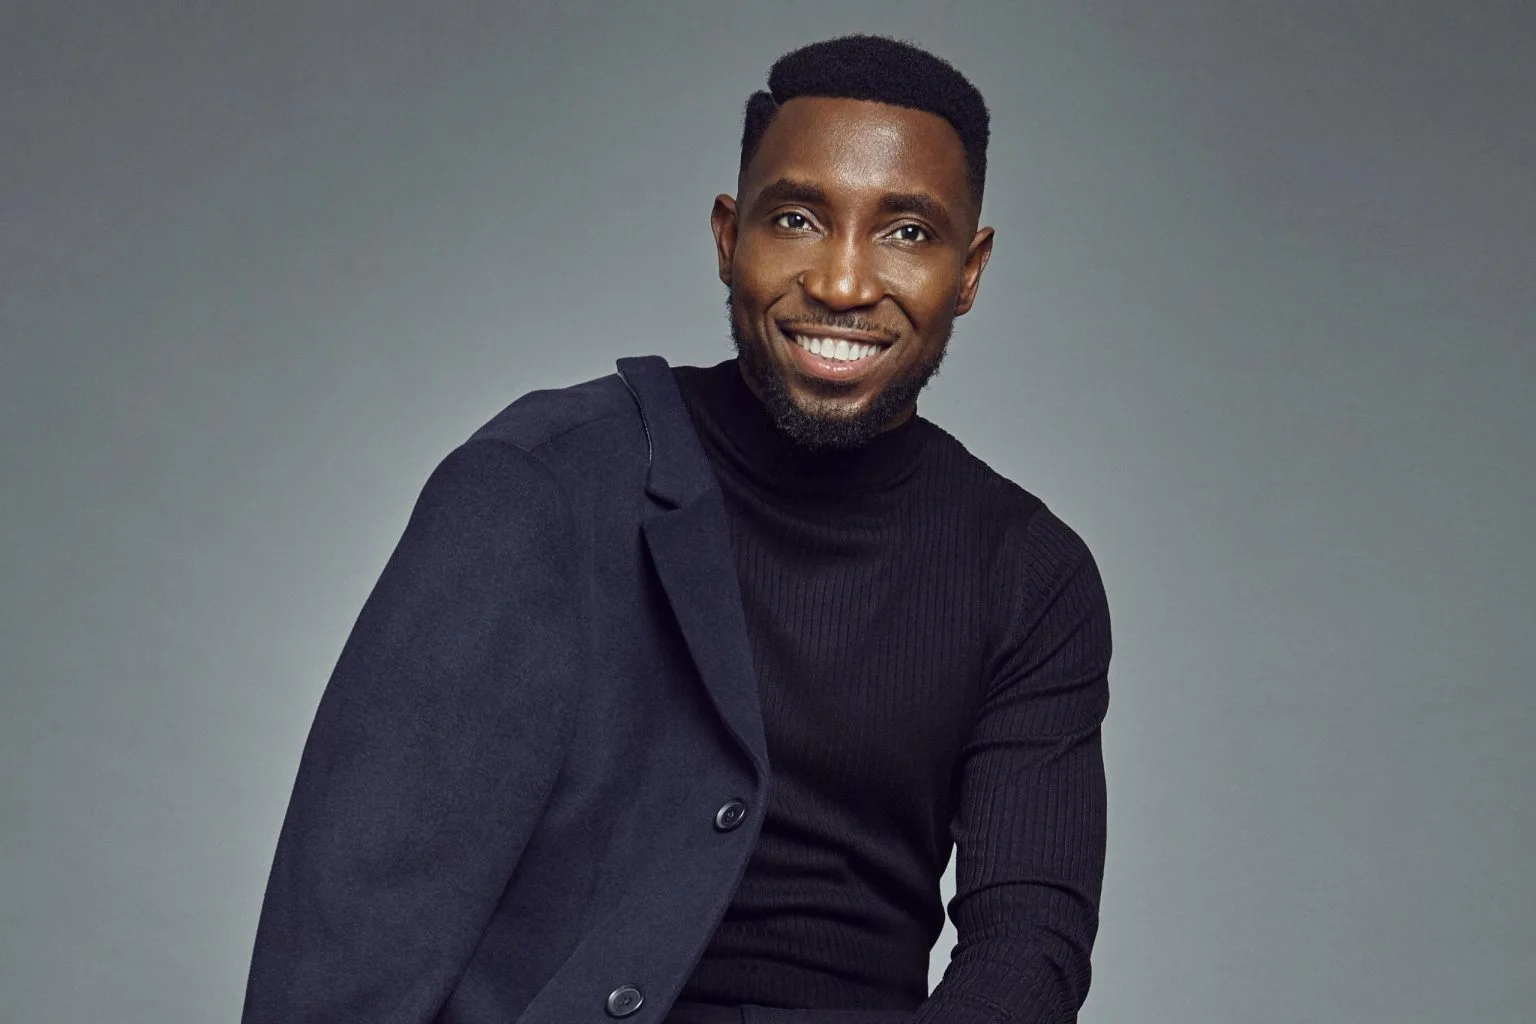 I lost sleep after someone gifted me my first N1m – Timi Dakolo